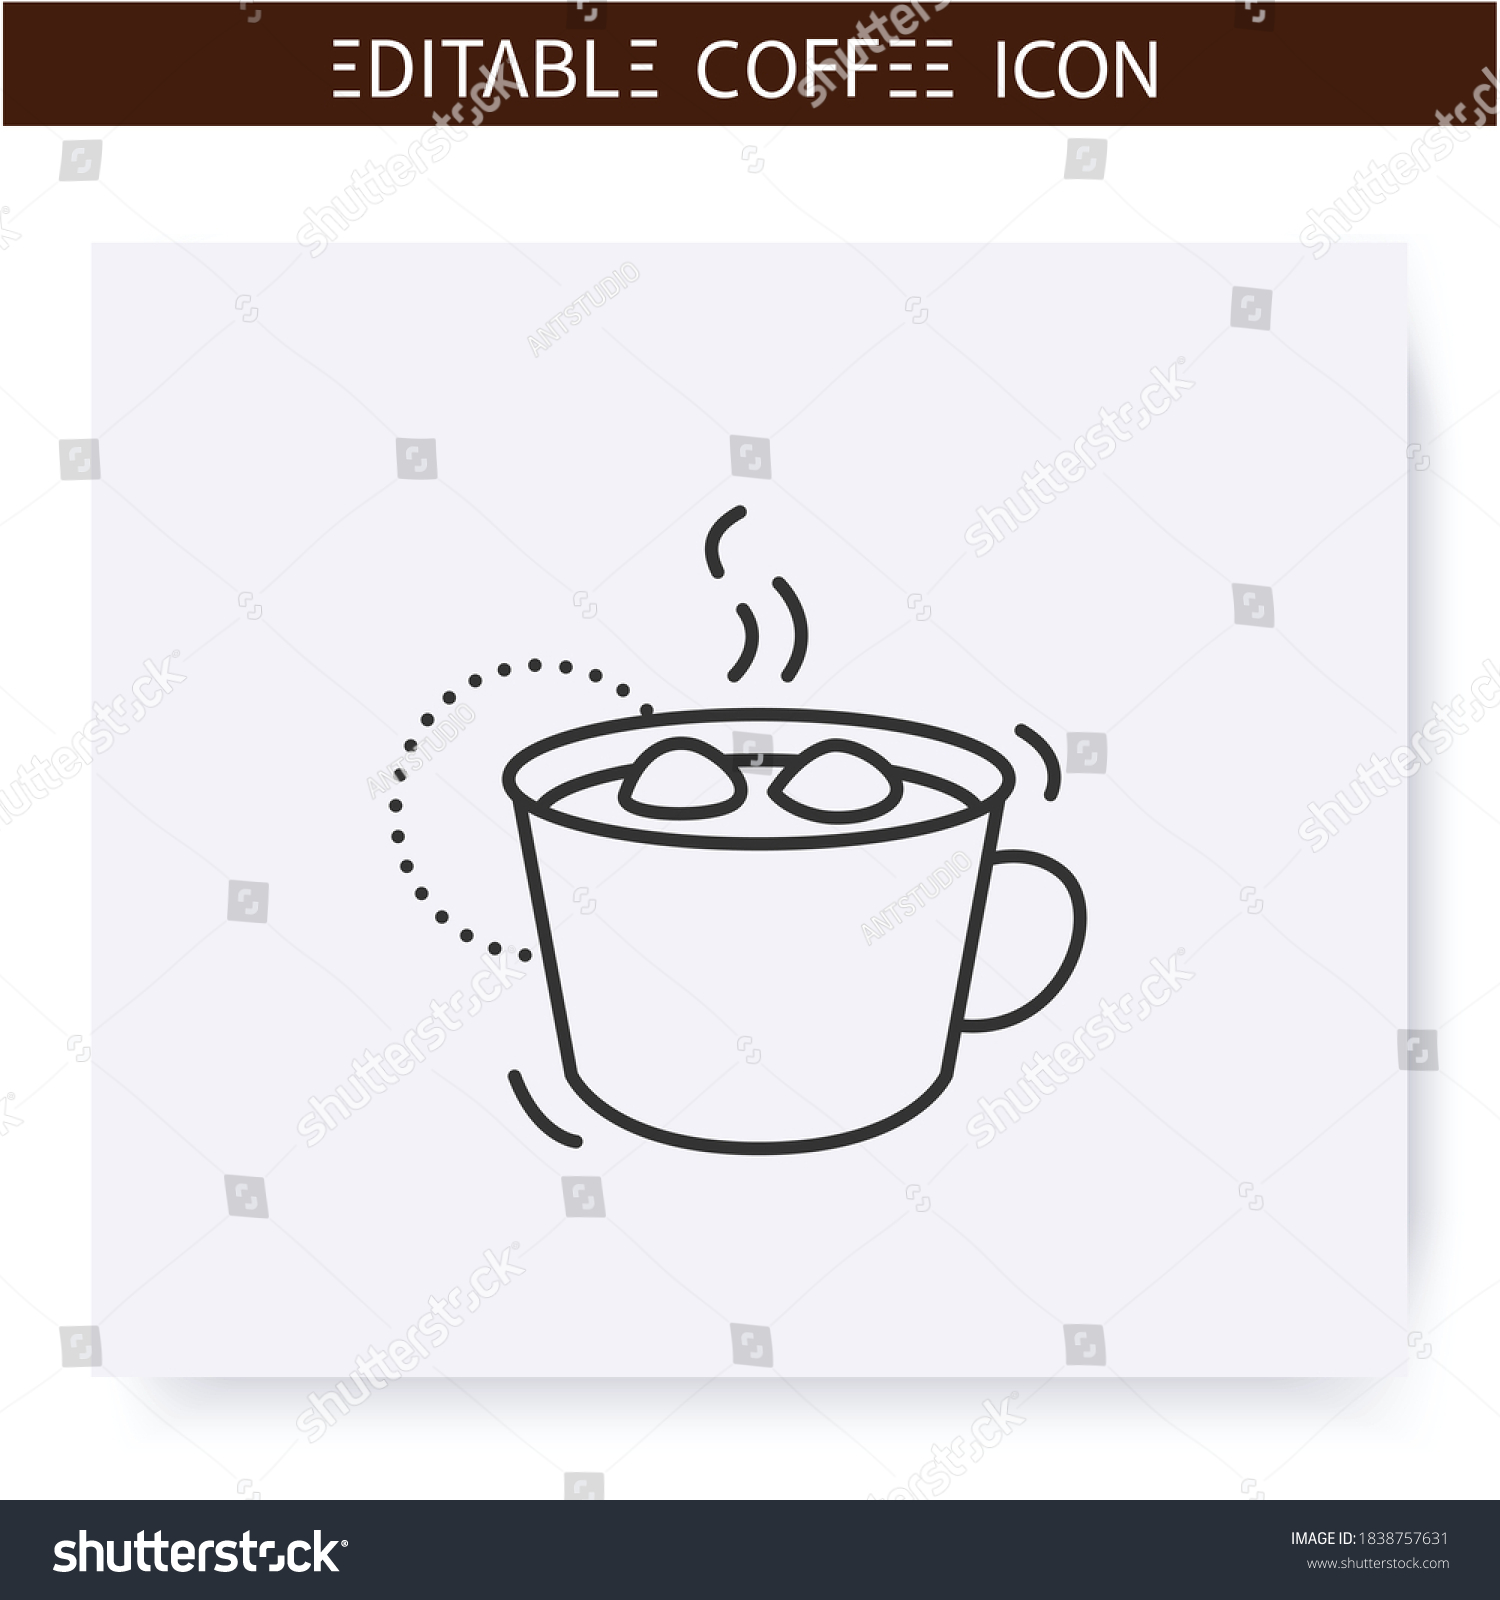 SVG of Coffee with marshmallow line icon.Type of coffee drink with topped marshmallow. Cocoa drink. Coffeehouse menu. Different caffeine drinks receipts concept. Isolated vector illustration. Editable stroke svg